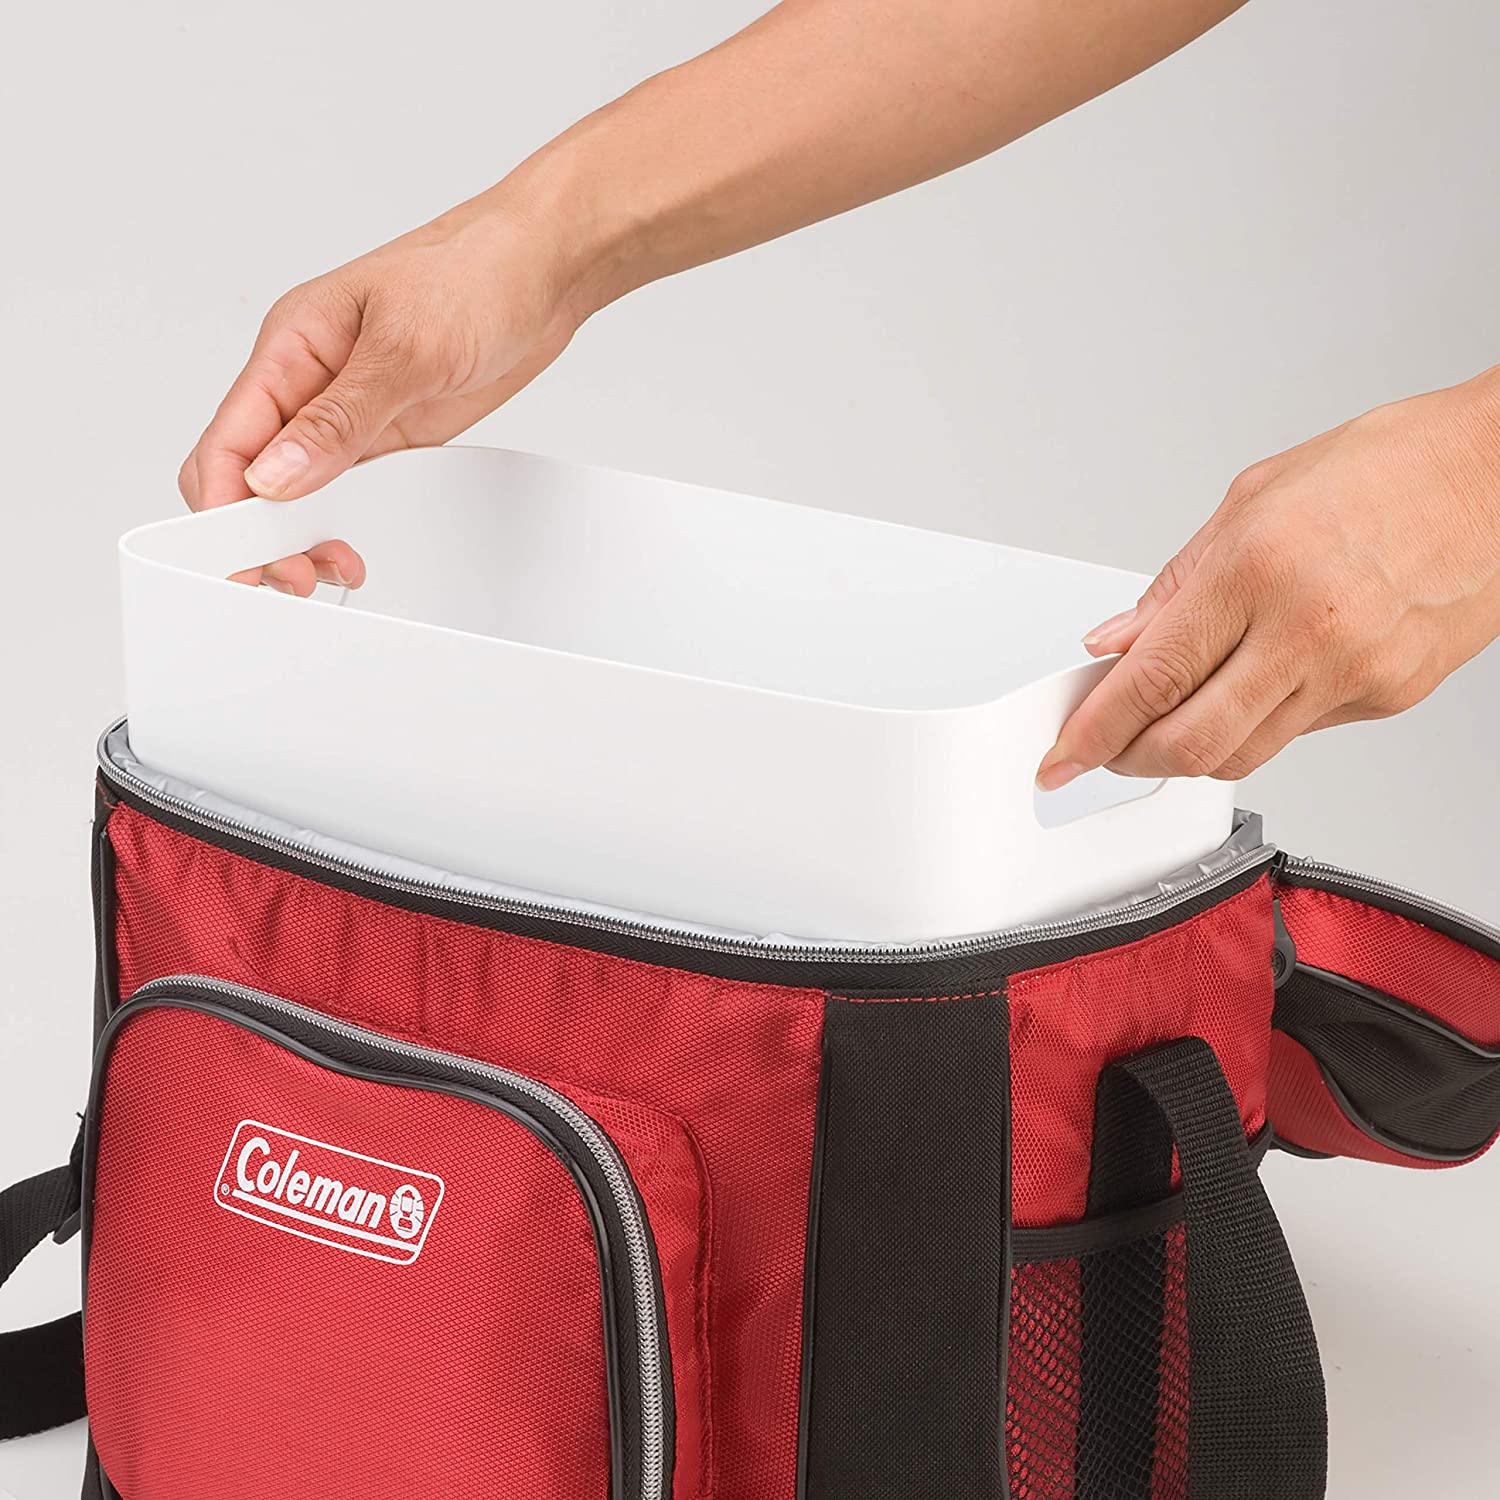 Coleman 9 Cans Soft-Sided Cooler, Red - image 4 of 5